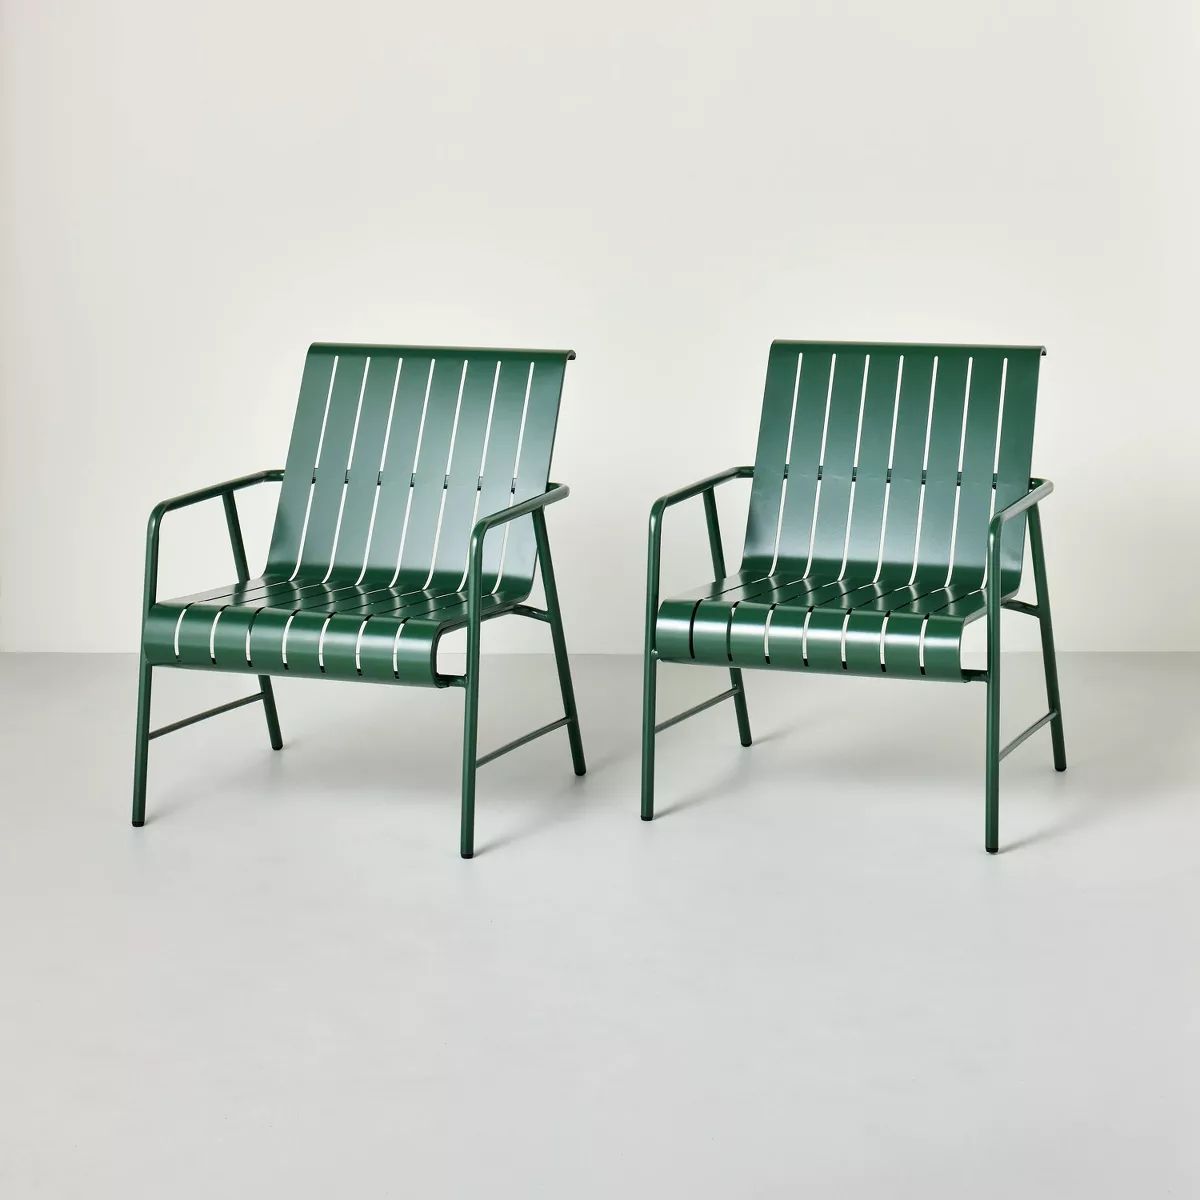 Slat Metal Outdoor Patio Club Chairs (Set of 2) Green - Hearth & Hand™ with Magnolia | Target